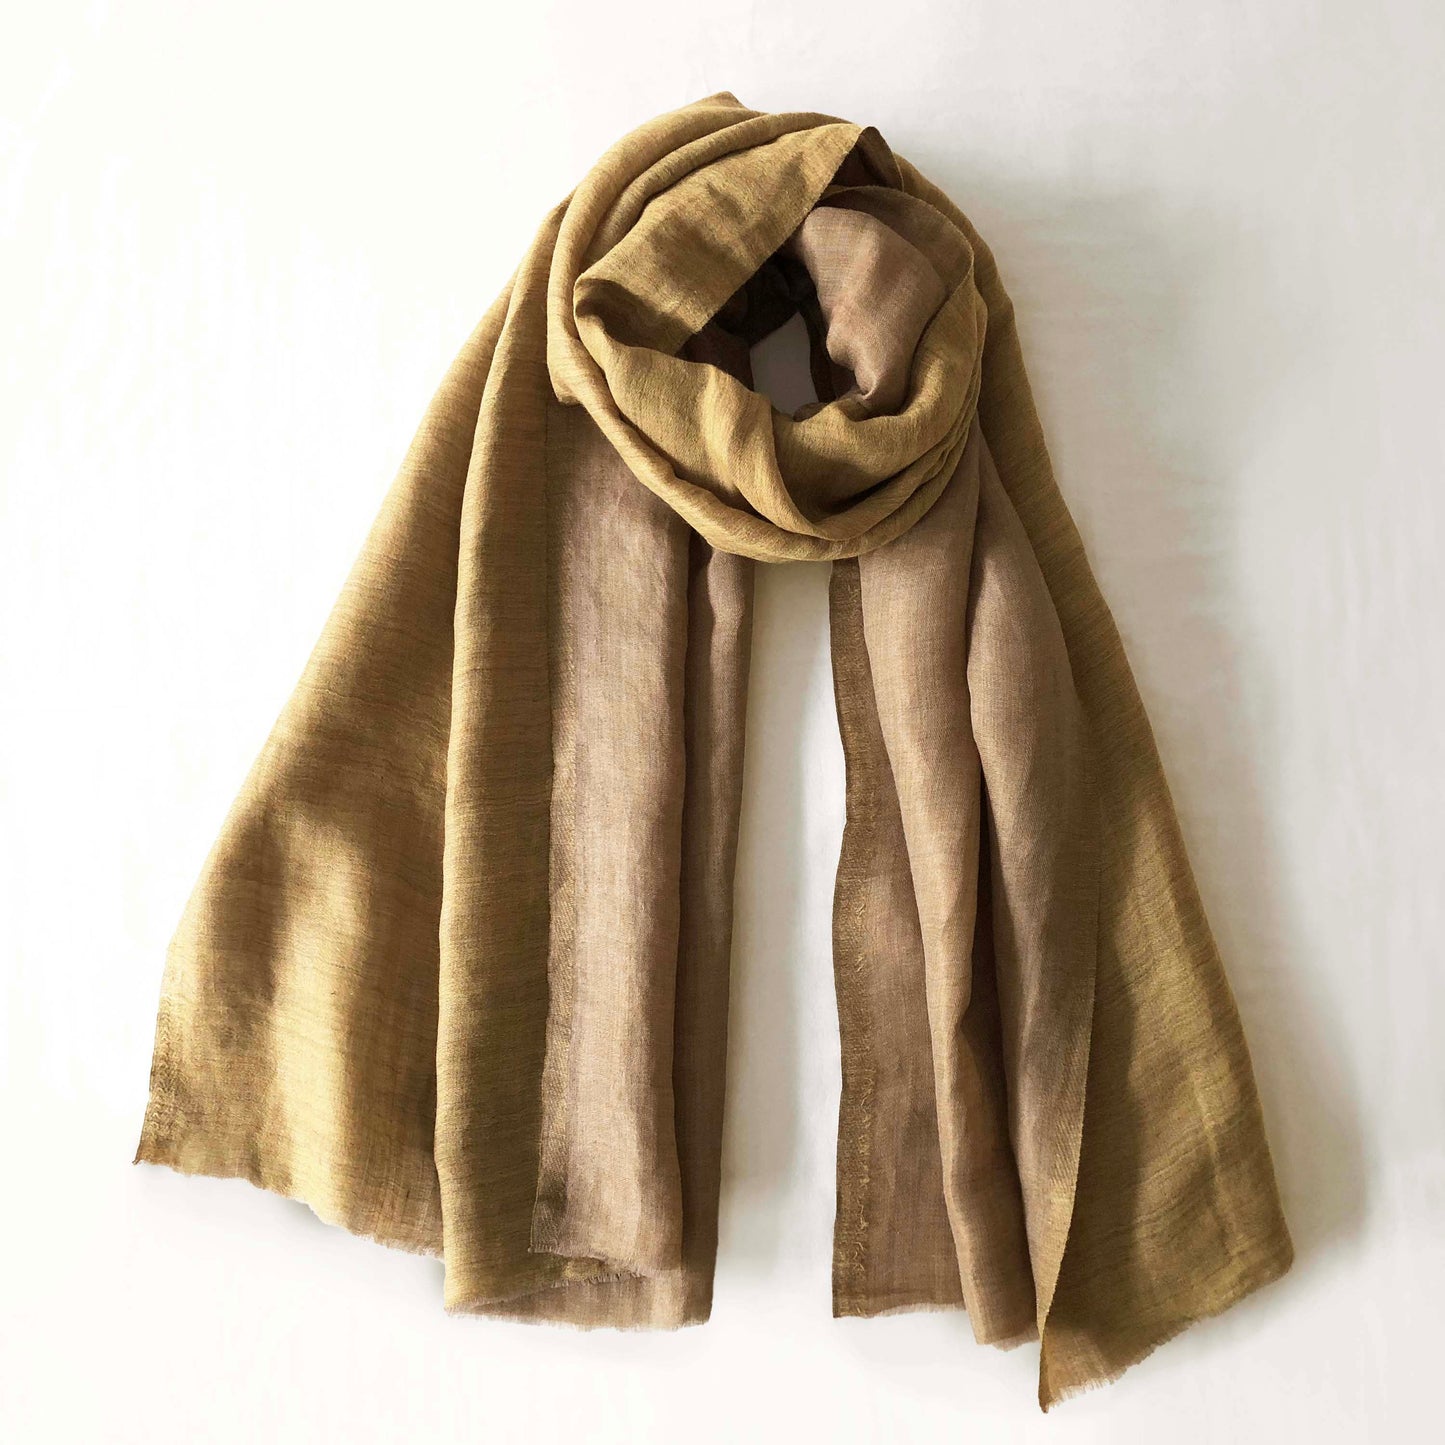 Mustard yellow and gold fine wool and zari scarf, reversible stole